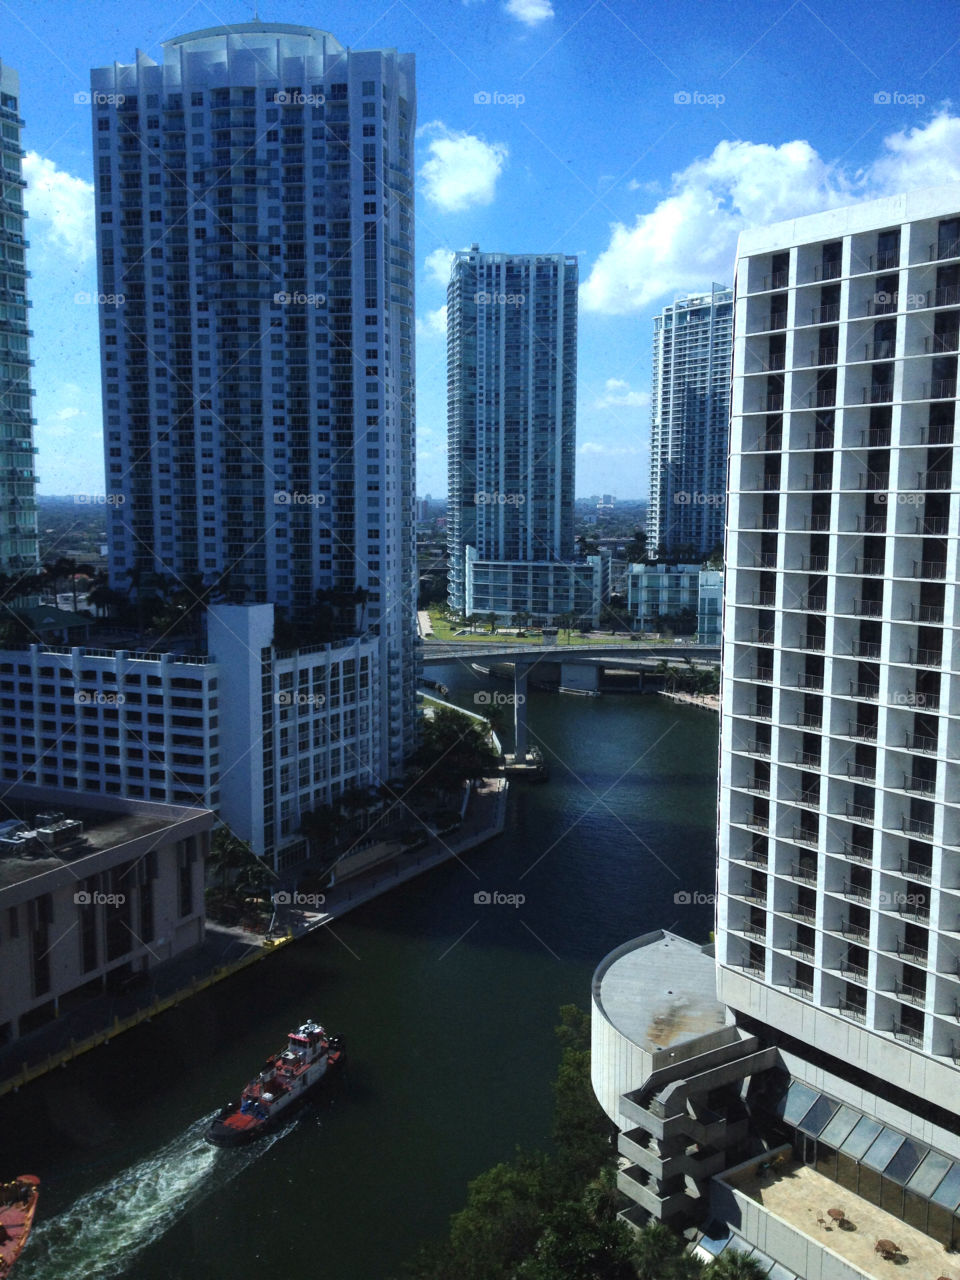 buildings river florida miami by musa3d